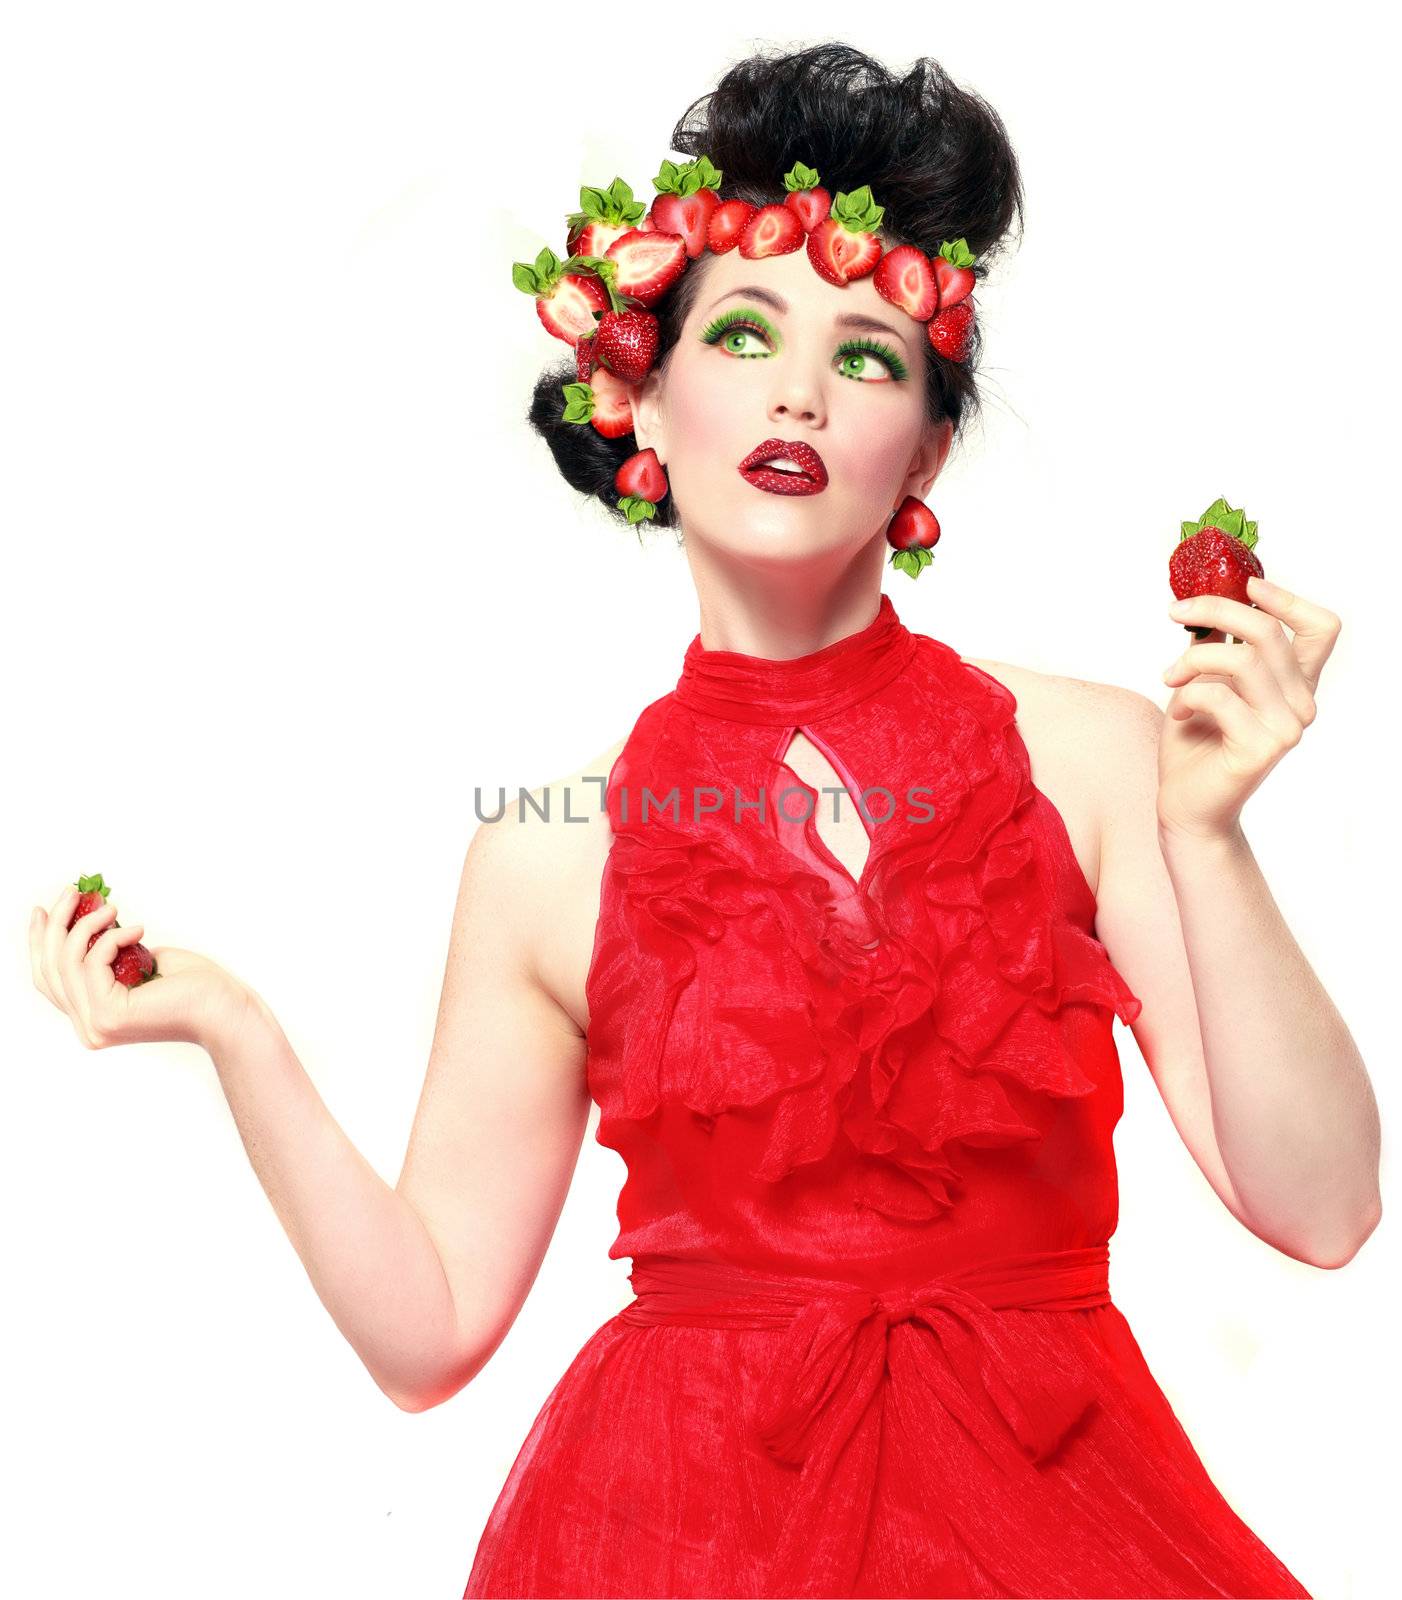 Gorgeous Woman Wearing Strawberries in her Hair by tobkatrina